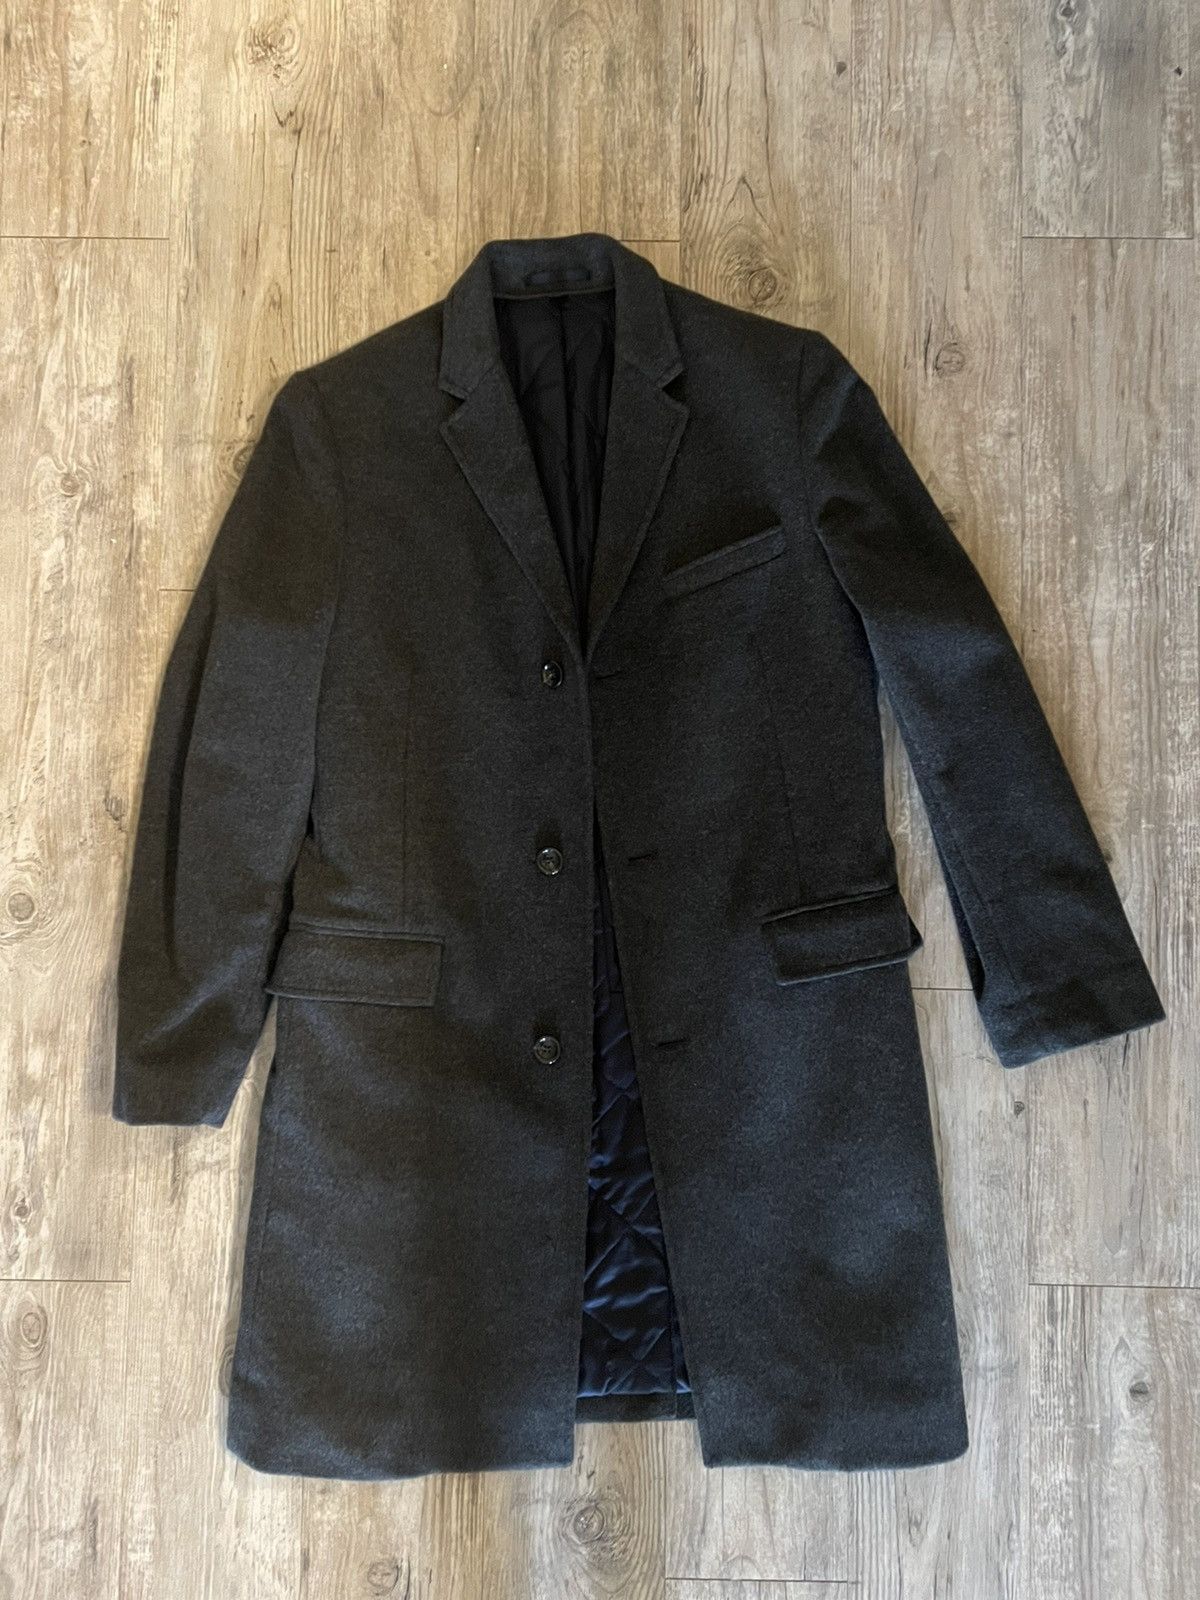 J.Crew Ludlow Grey Top Coat Quilted Down Inside | Grailed